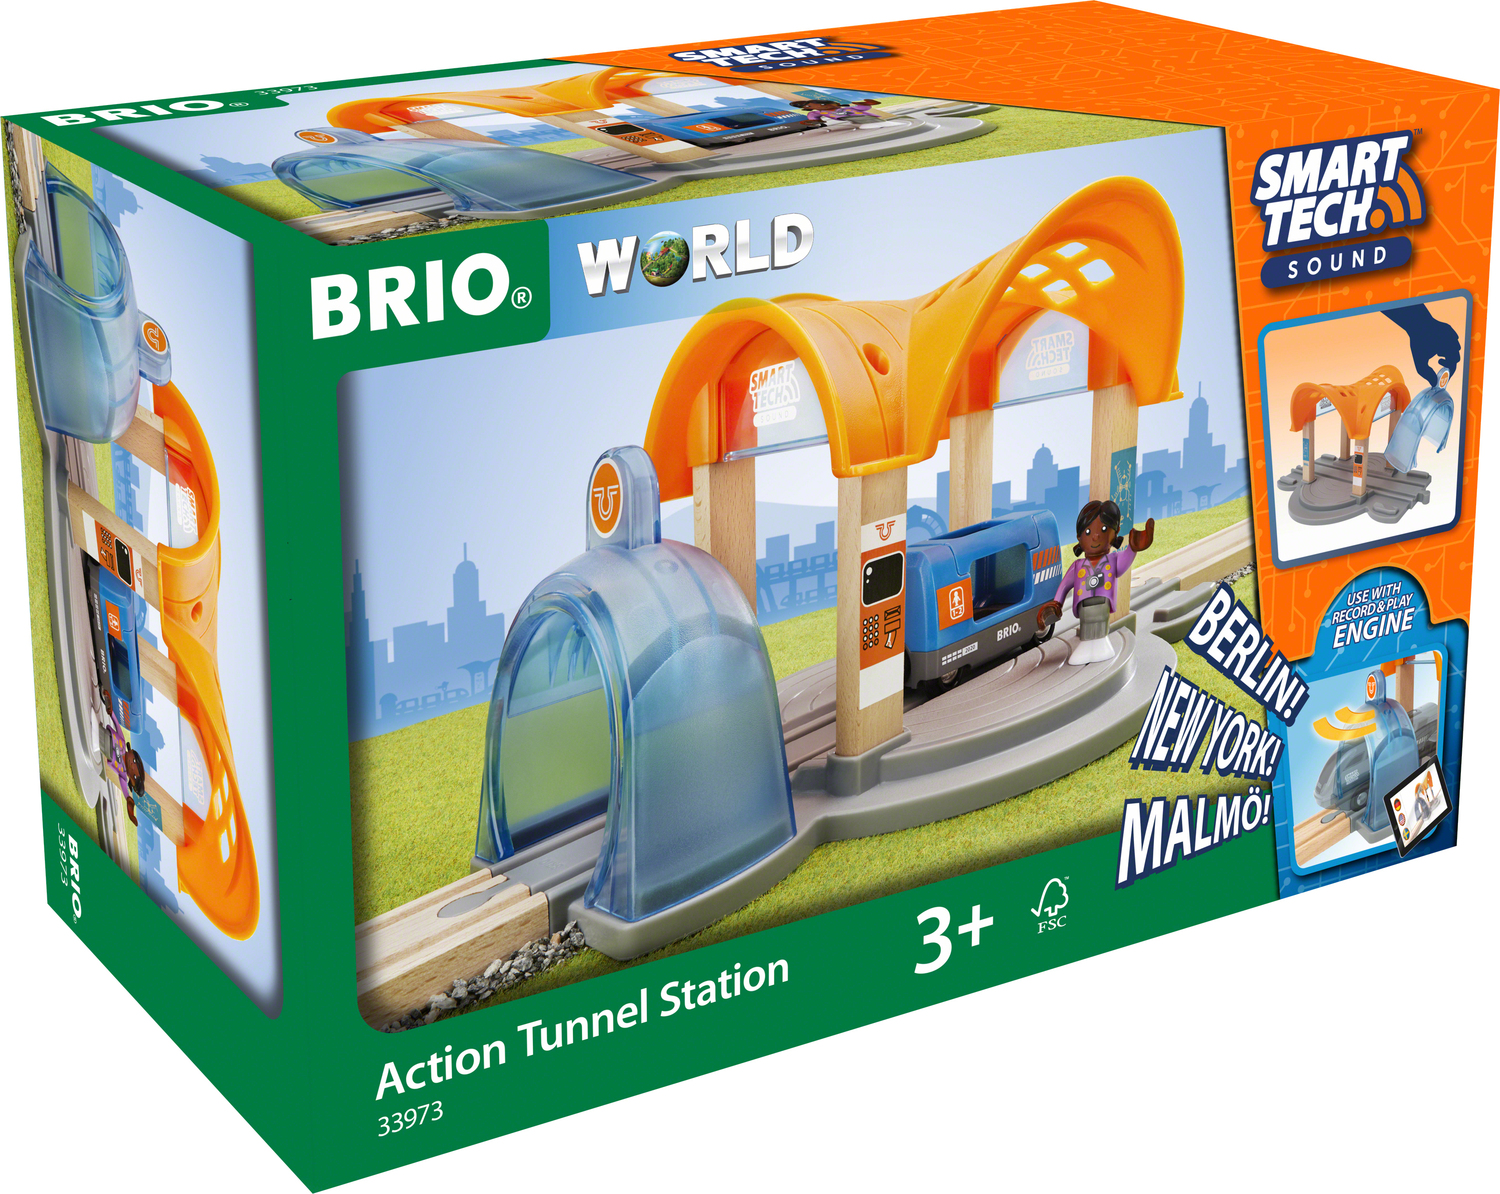 Brio Smart Tech Sound Action Tunnel Station, Educational & Learning Toys, Impression 5 Science Center